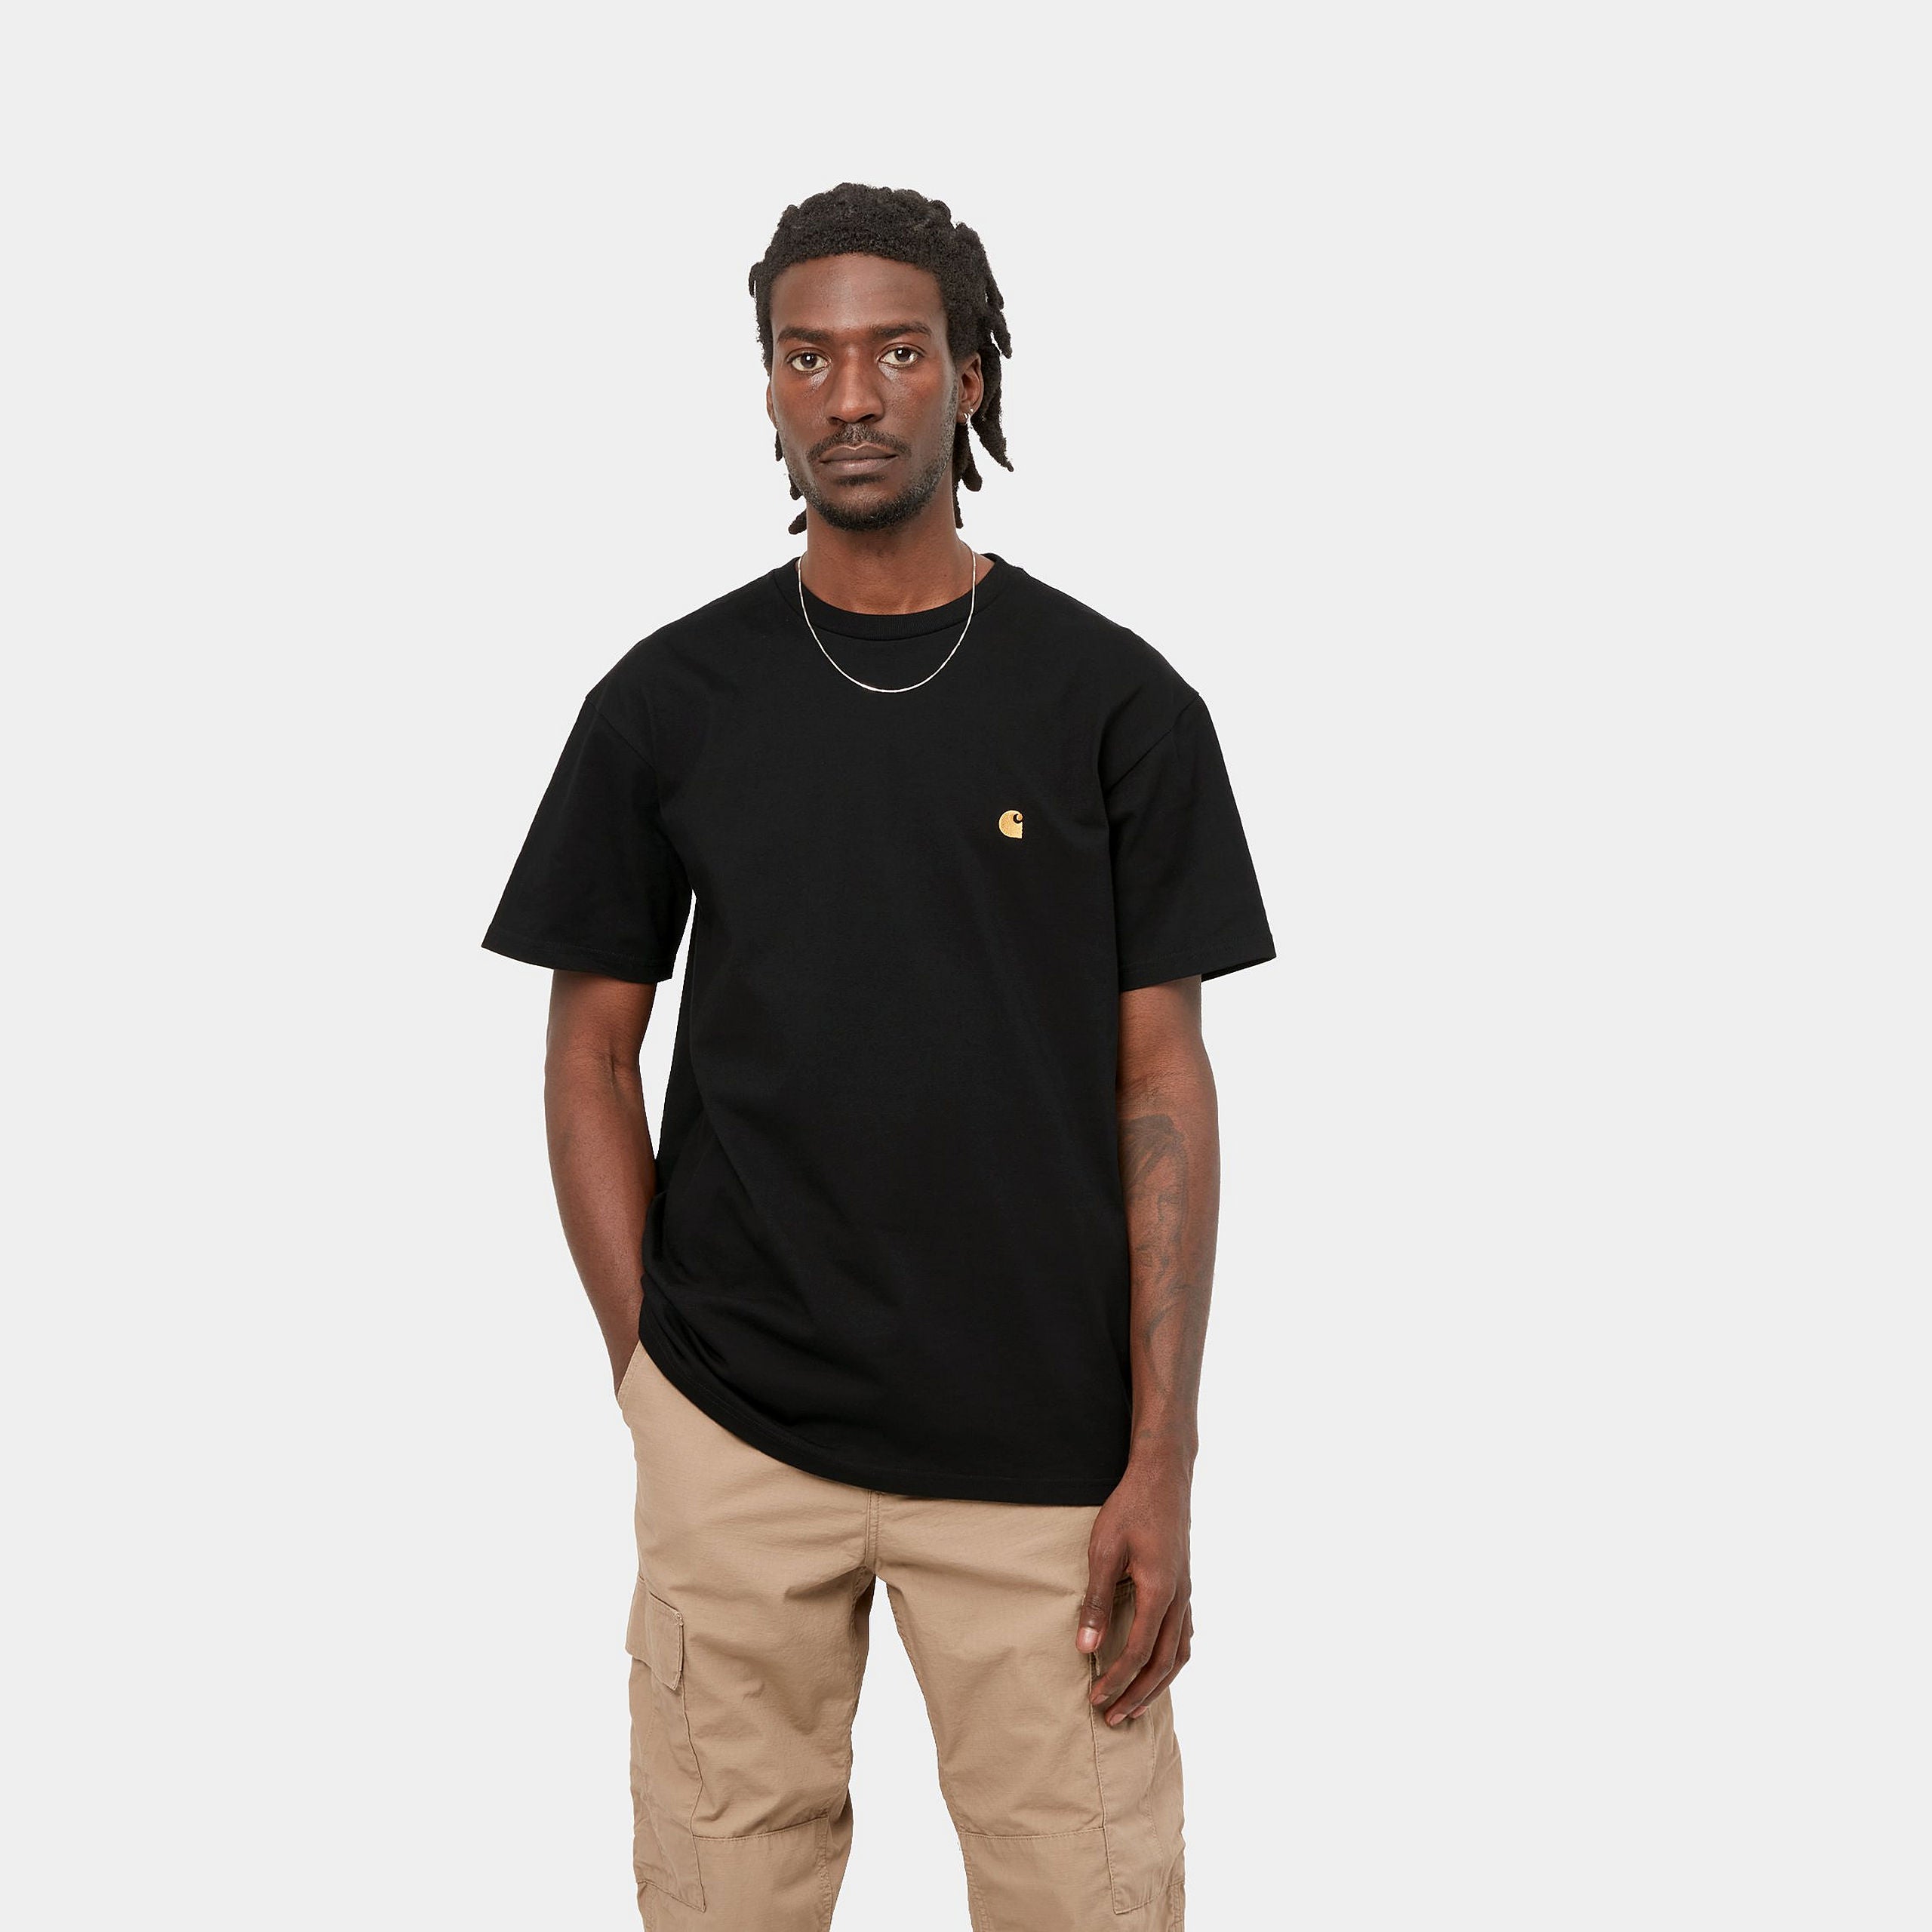 Carhartt WIP S/S Chase T-Shirt (black/gold) - Blue Mountain Store